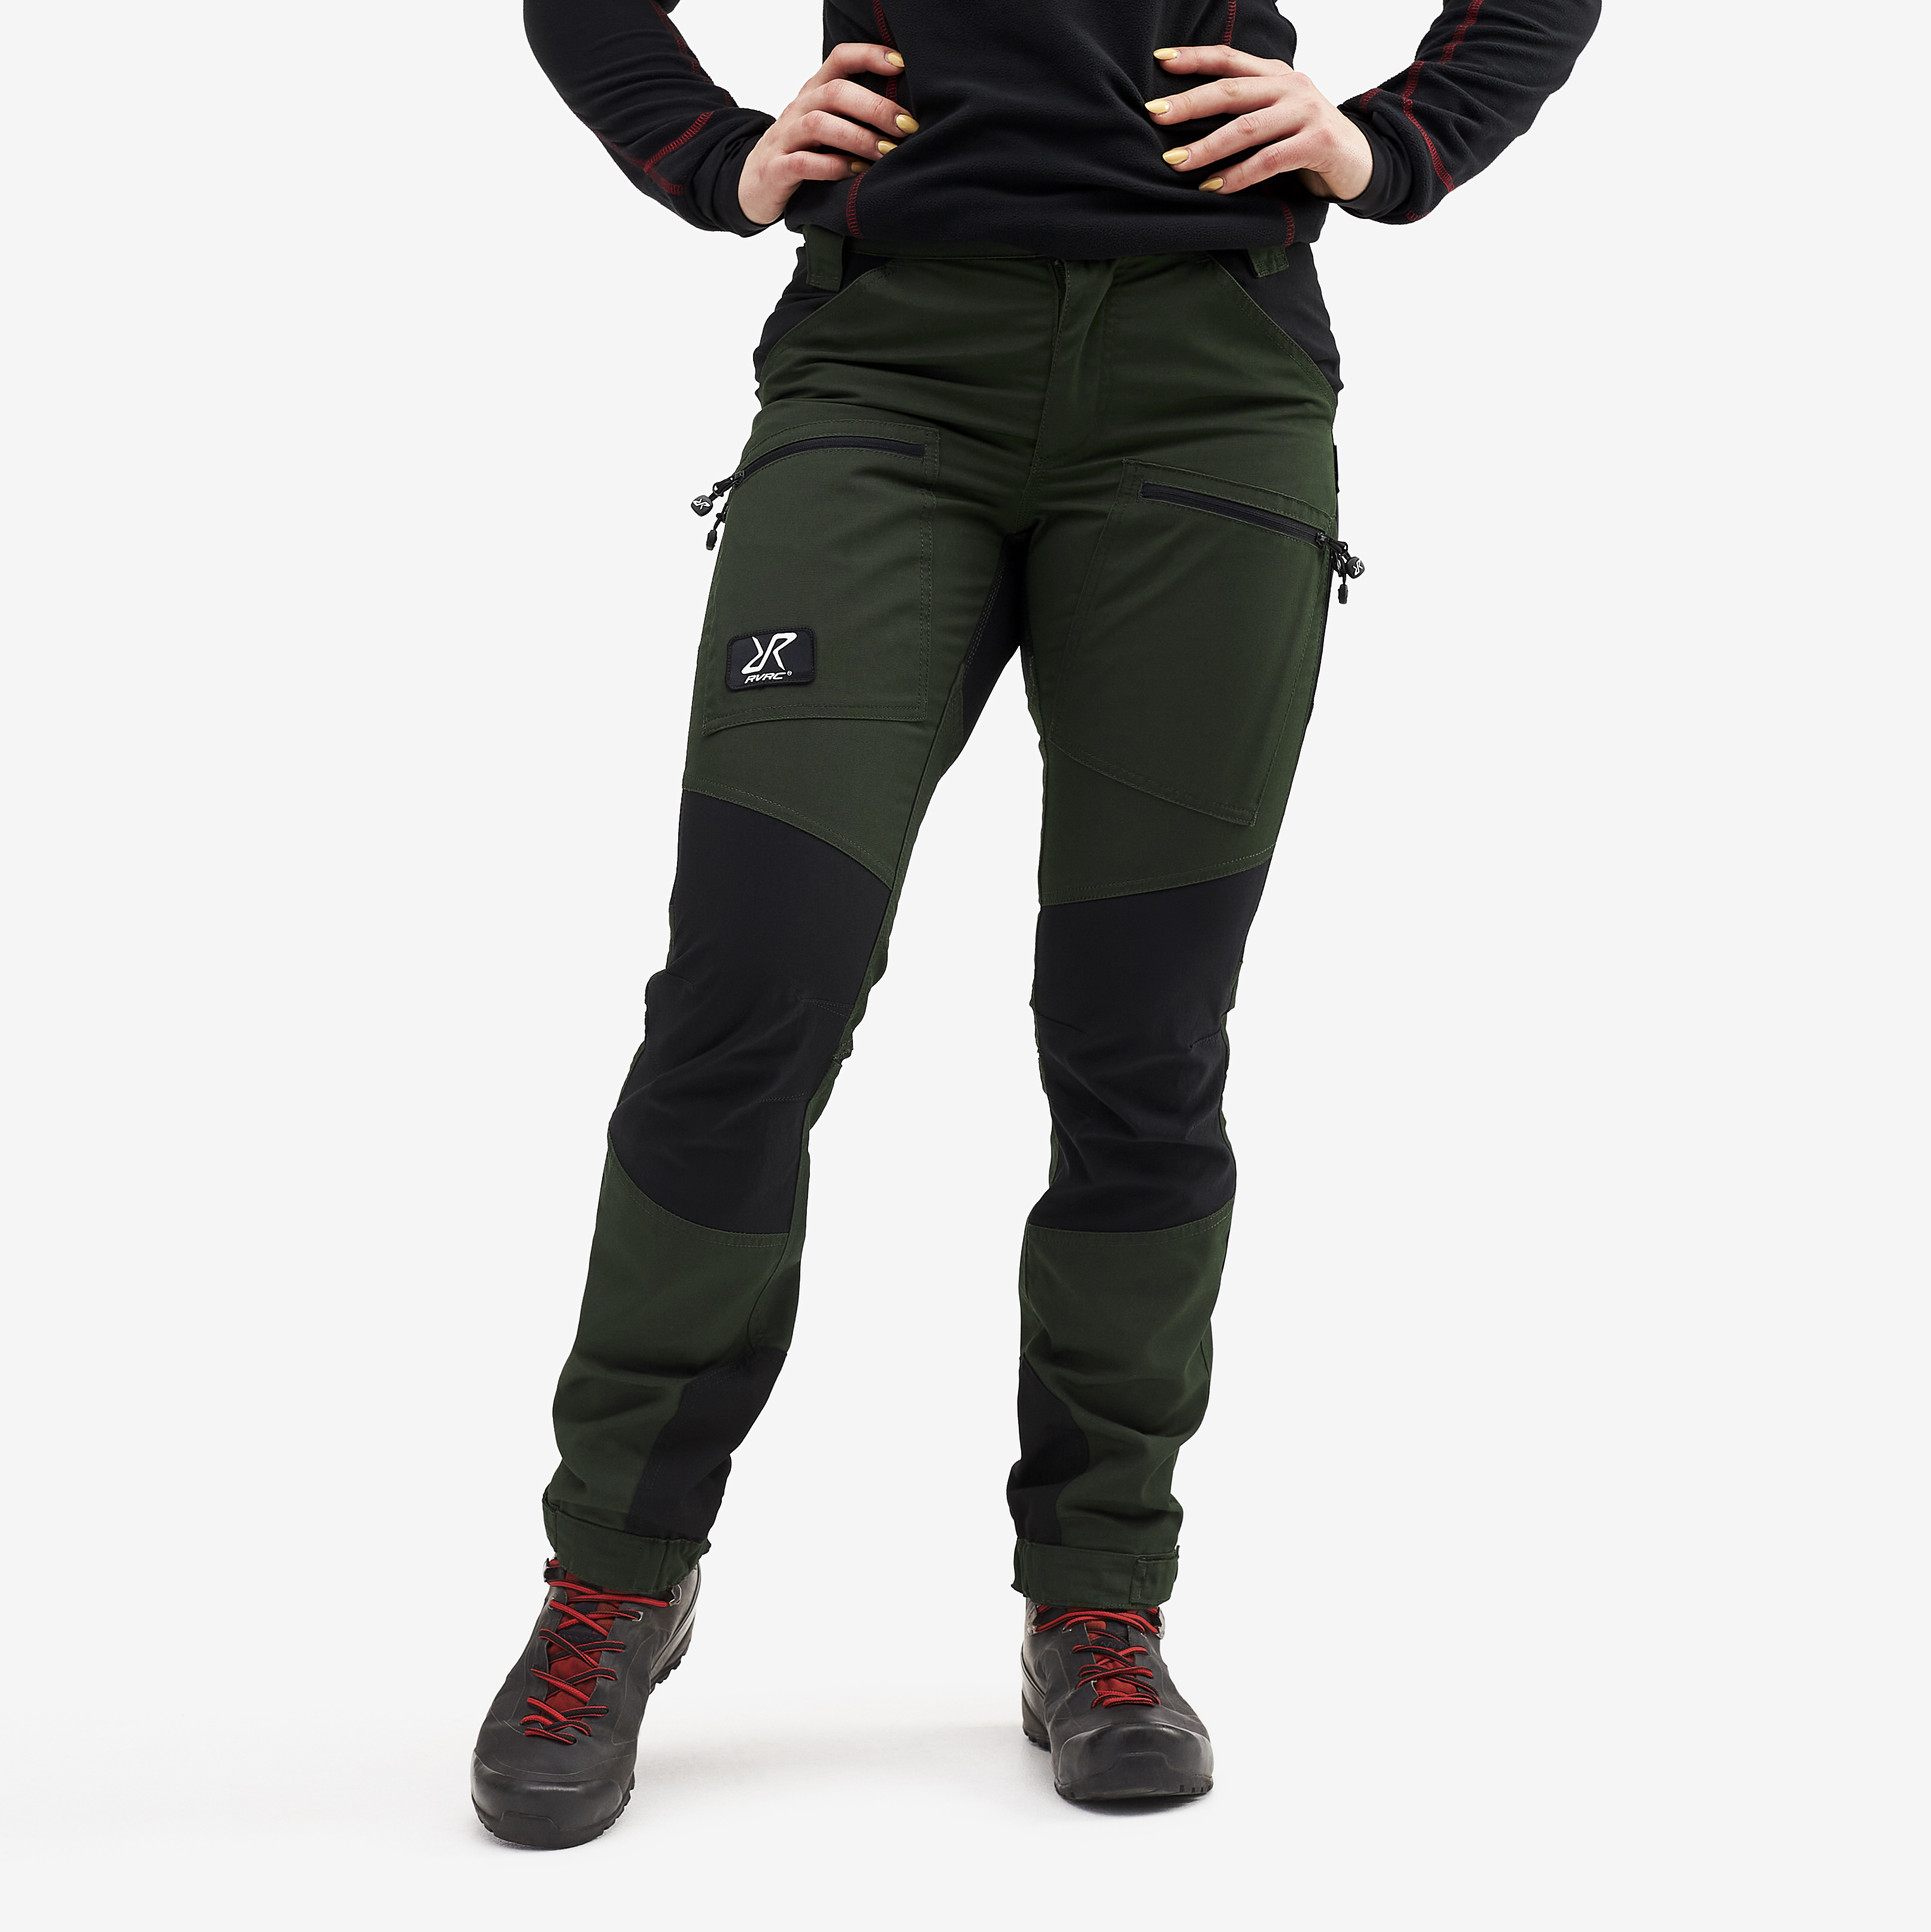 Nordwand Pro Short hiking trousers for women in green